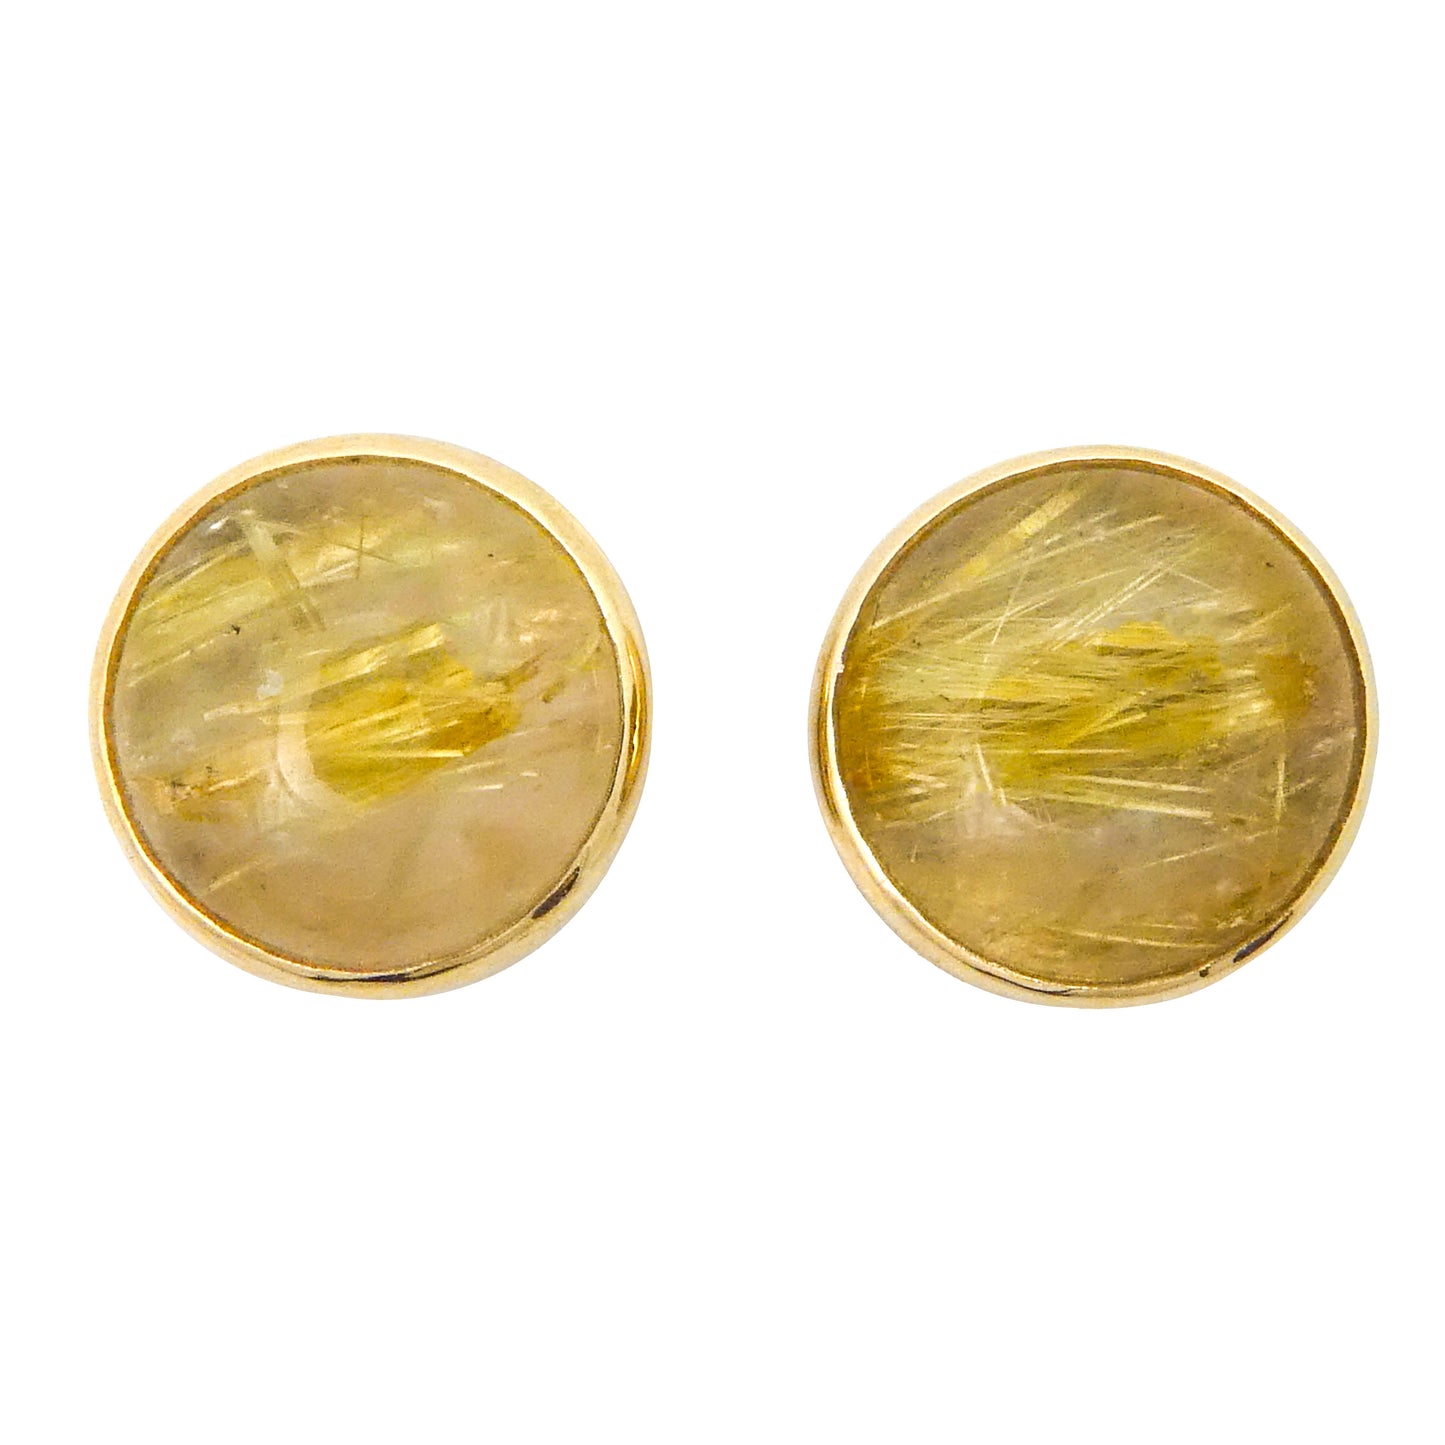 Golden Rutilated Quartz Earrings and 14k yellow gold 8mm round stud earrings | Ready to Ship